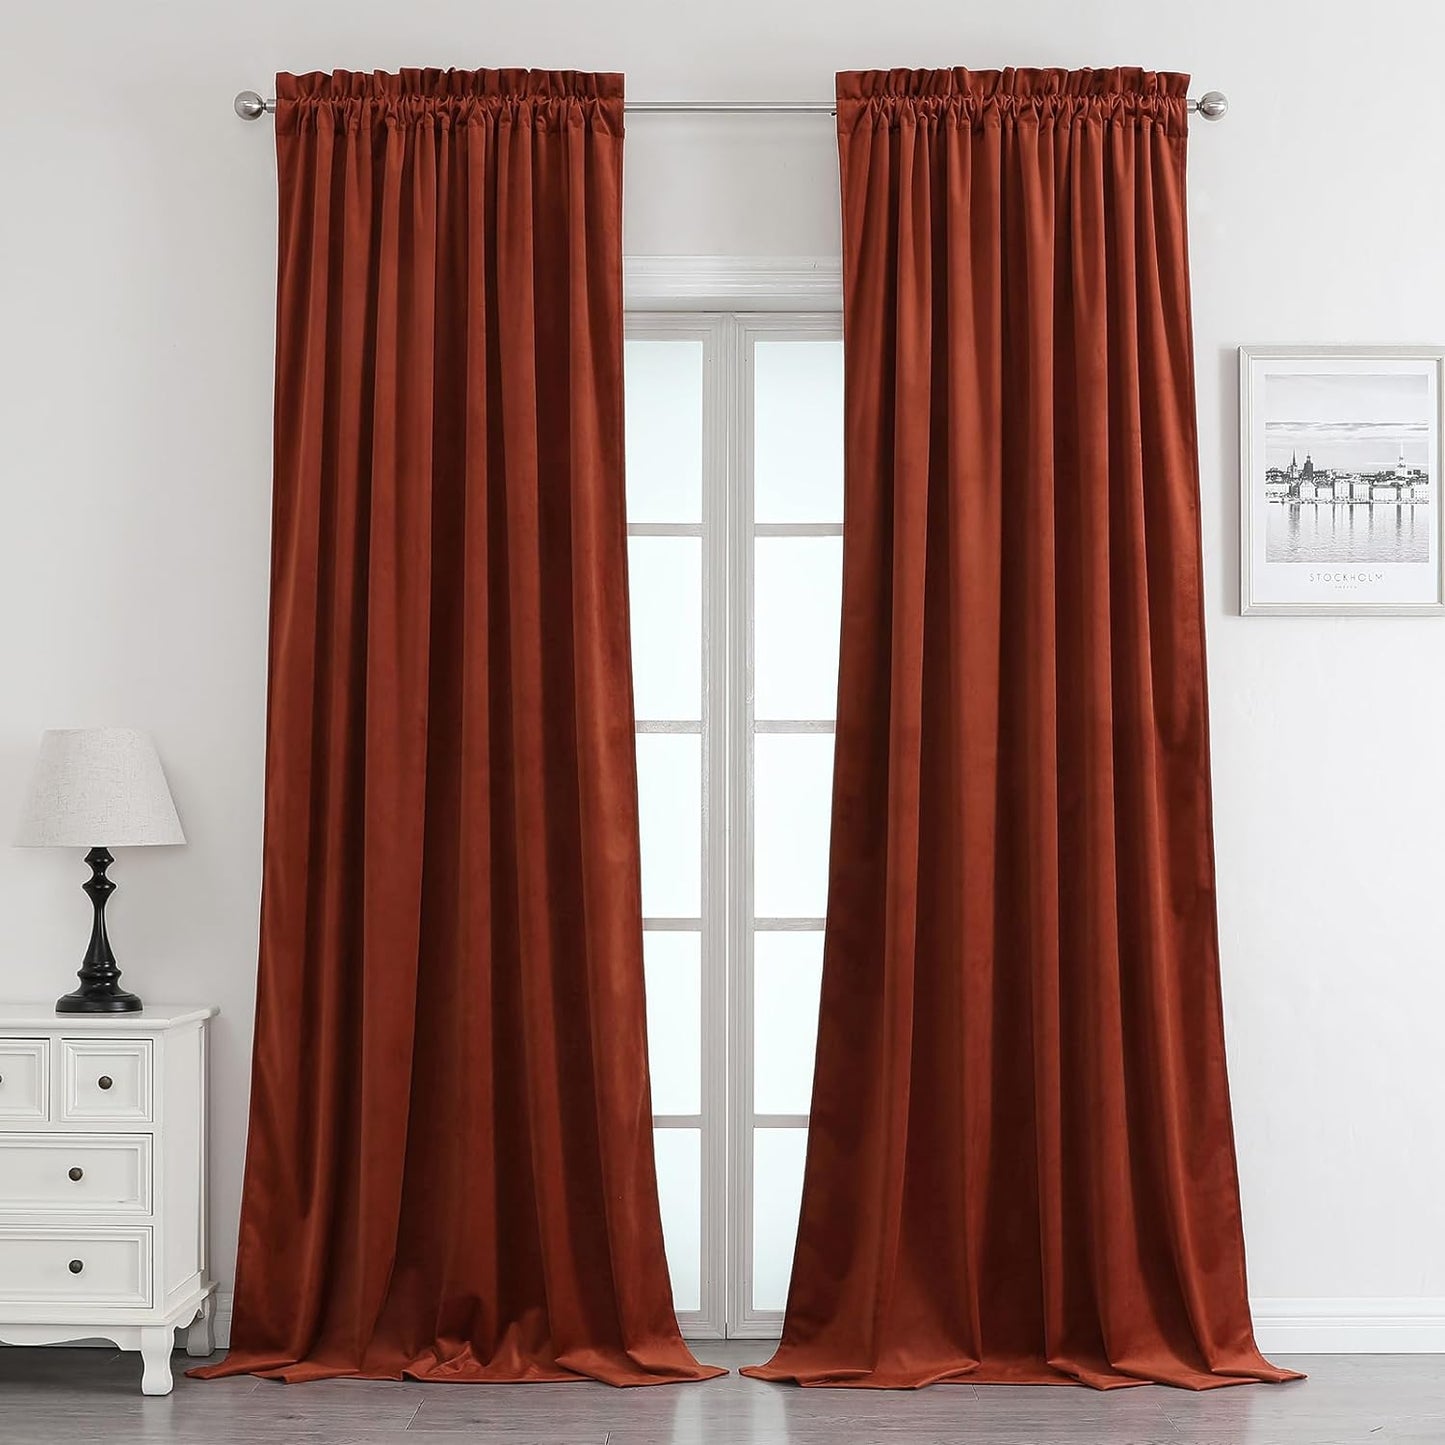 Benedeco Green Velvet Curtains for Bedroom Window, Super Soft Luxury Drapes, Room Darkening Thermal Insulated Rod Pocket Curtain for Living Room, W52 by L84 Inches, 2 Panels  Benedeco Rust Red W52 * L120 | 2 Panels 